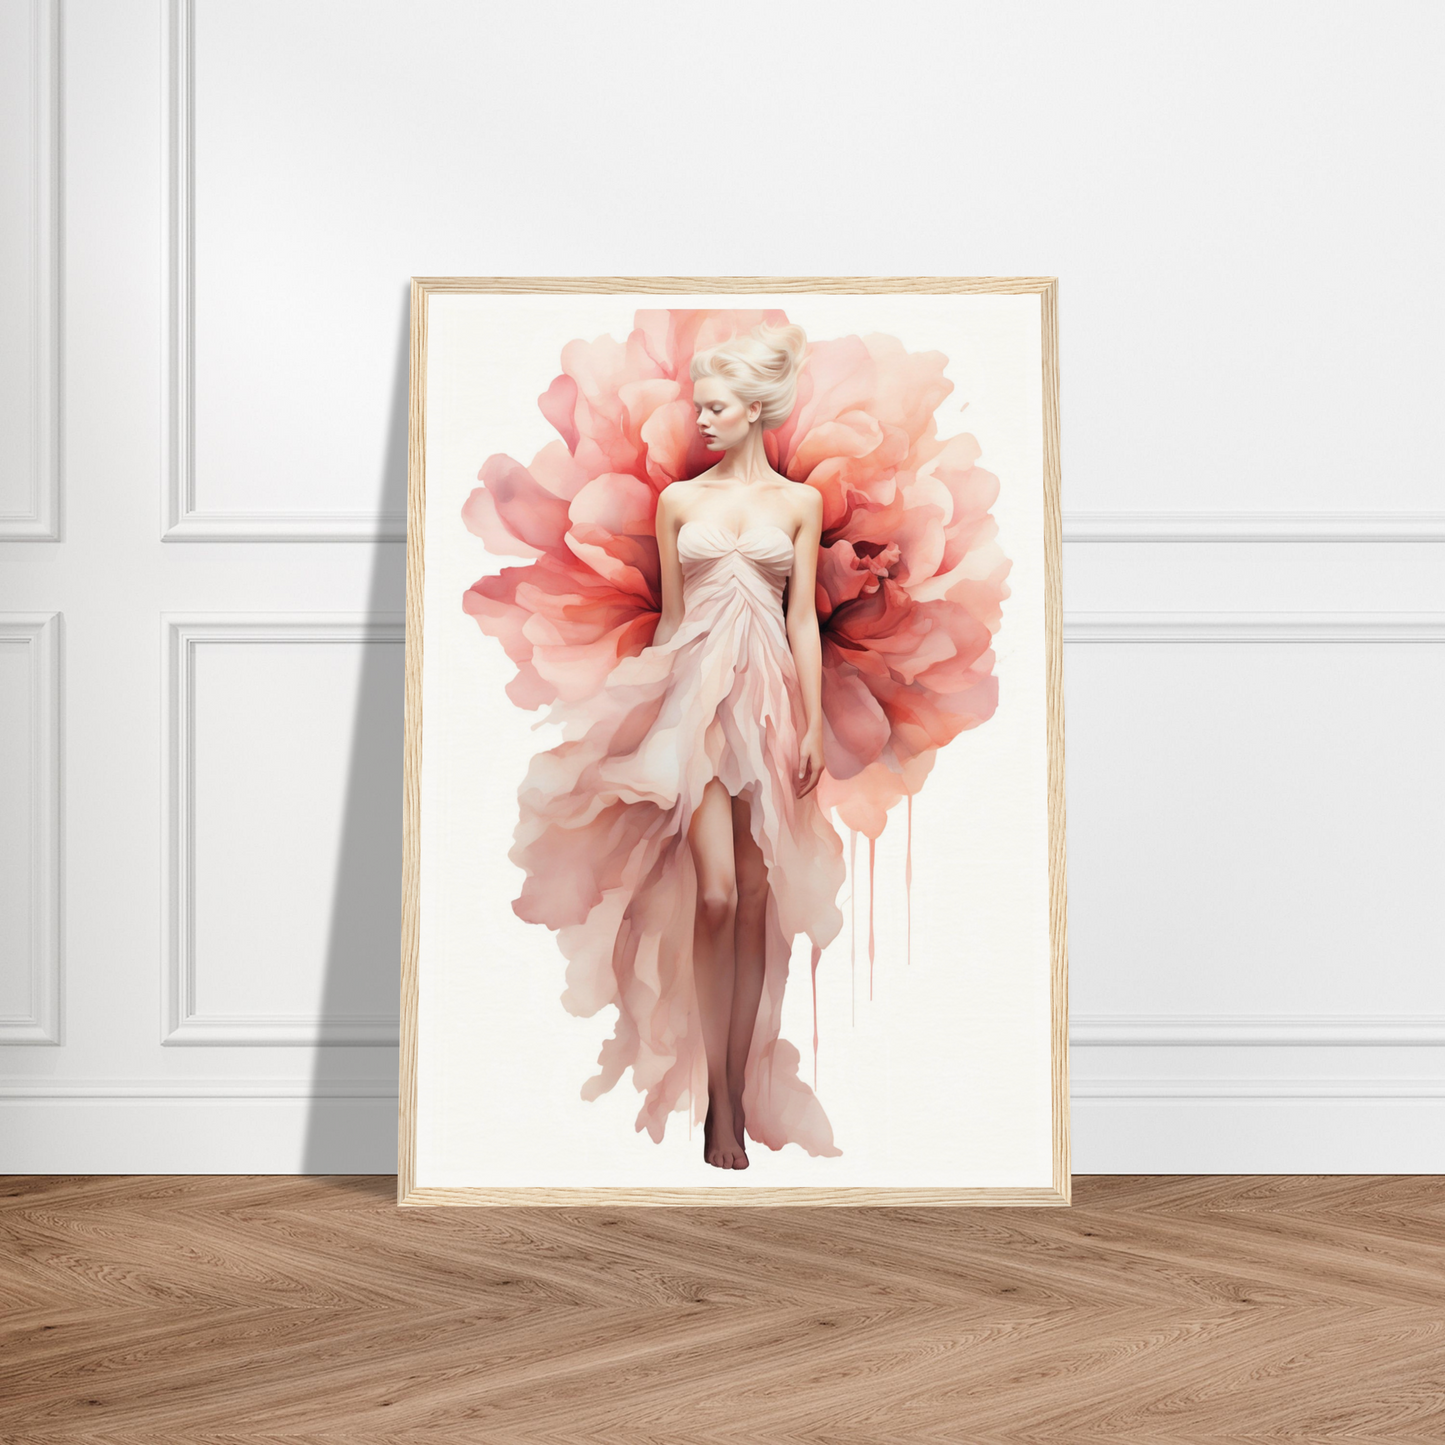 An image of a woman in a pink dress, perfect for transforming your space with Serenity The Oracle Windows™ Collection.